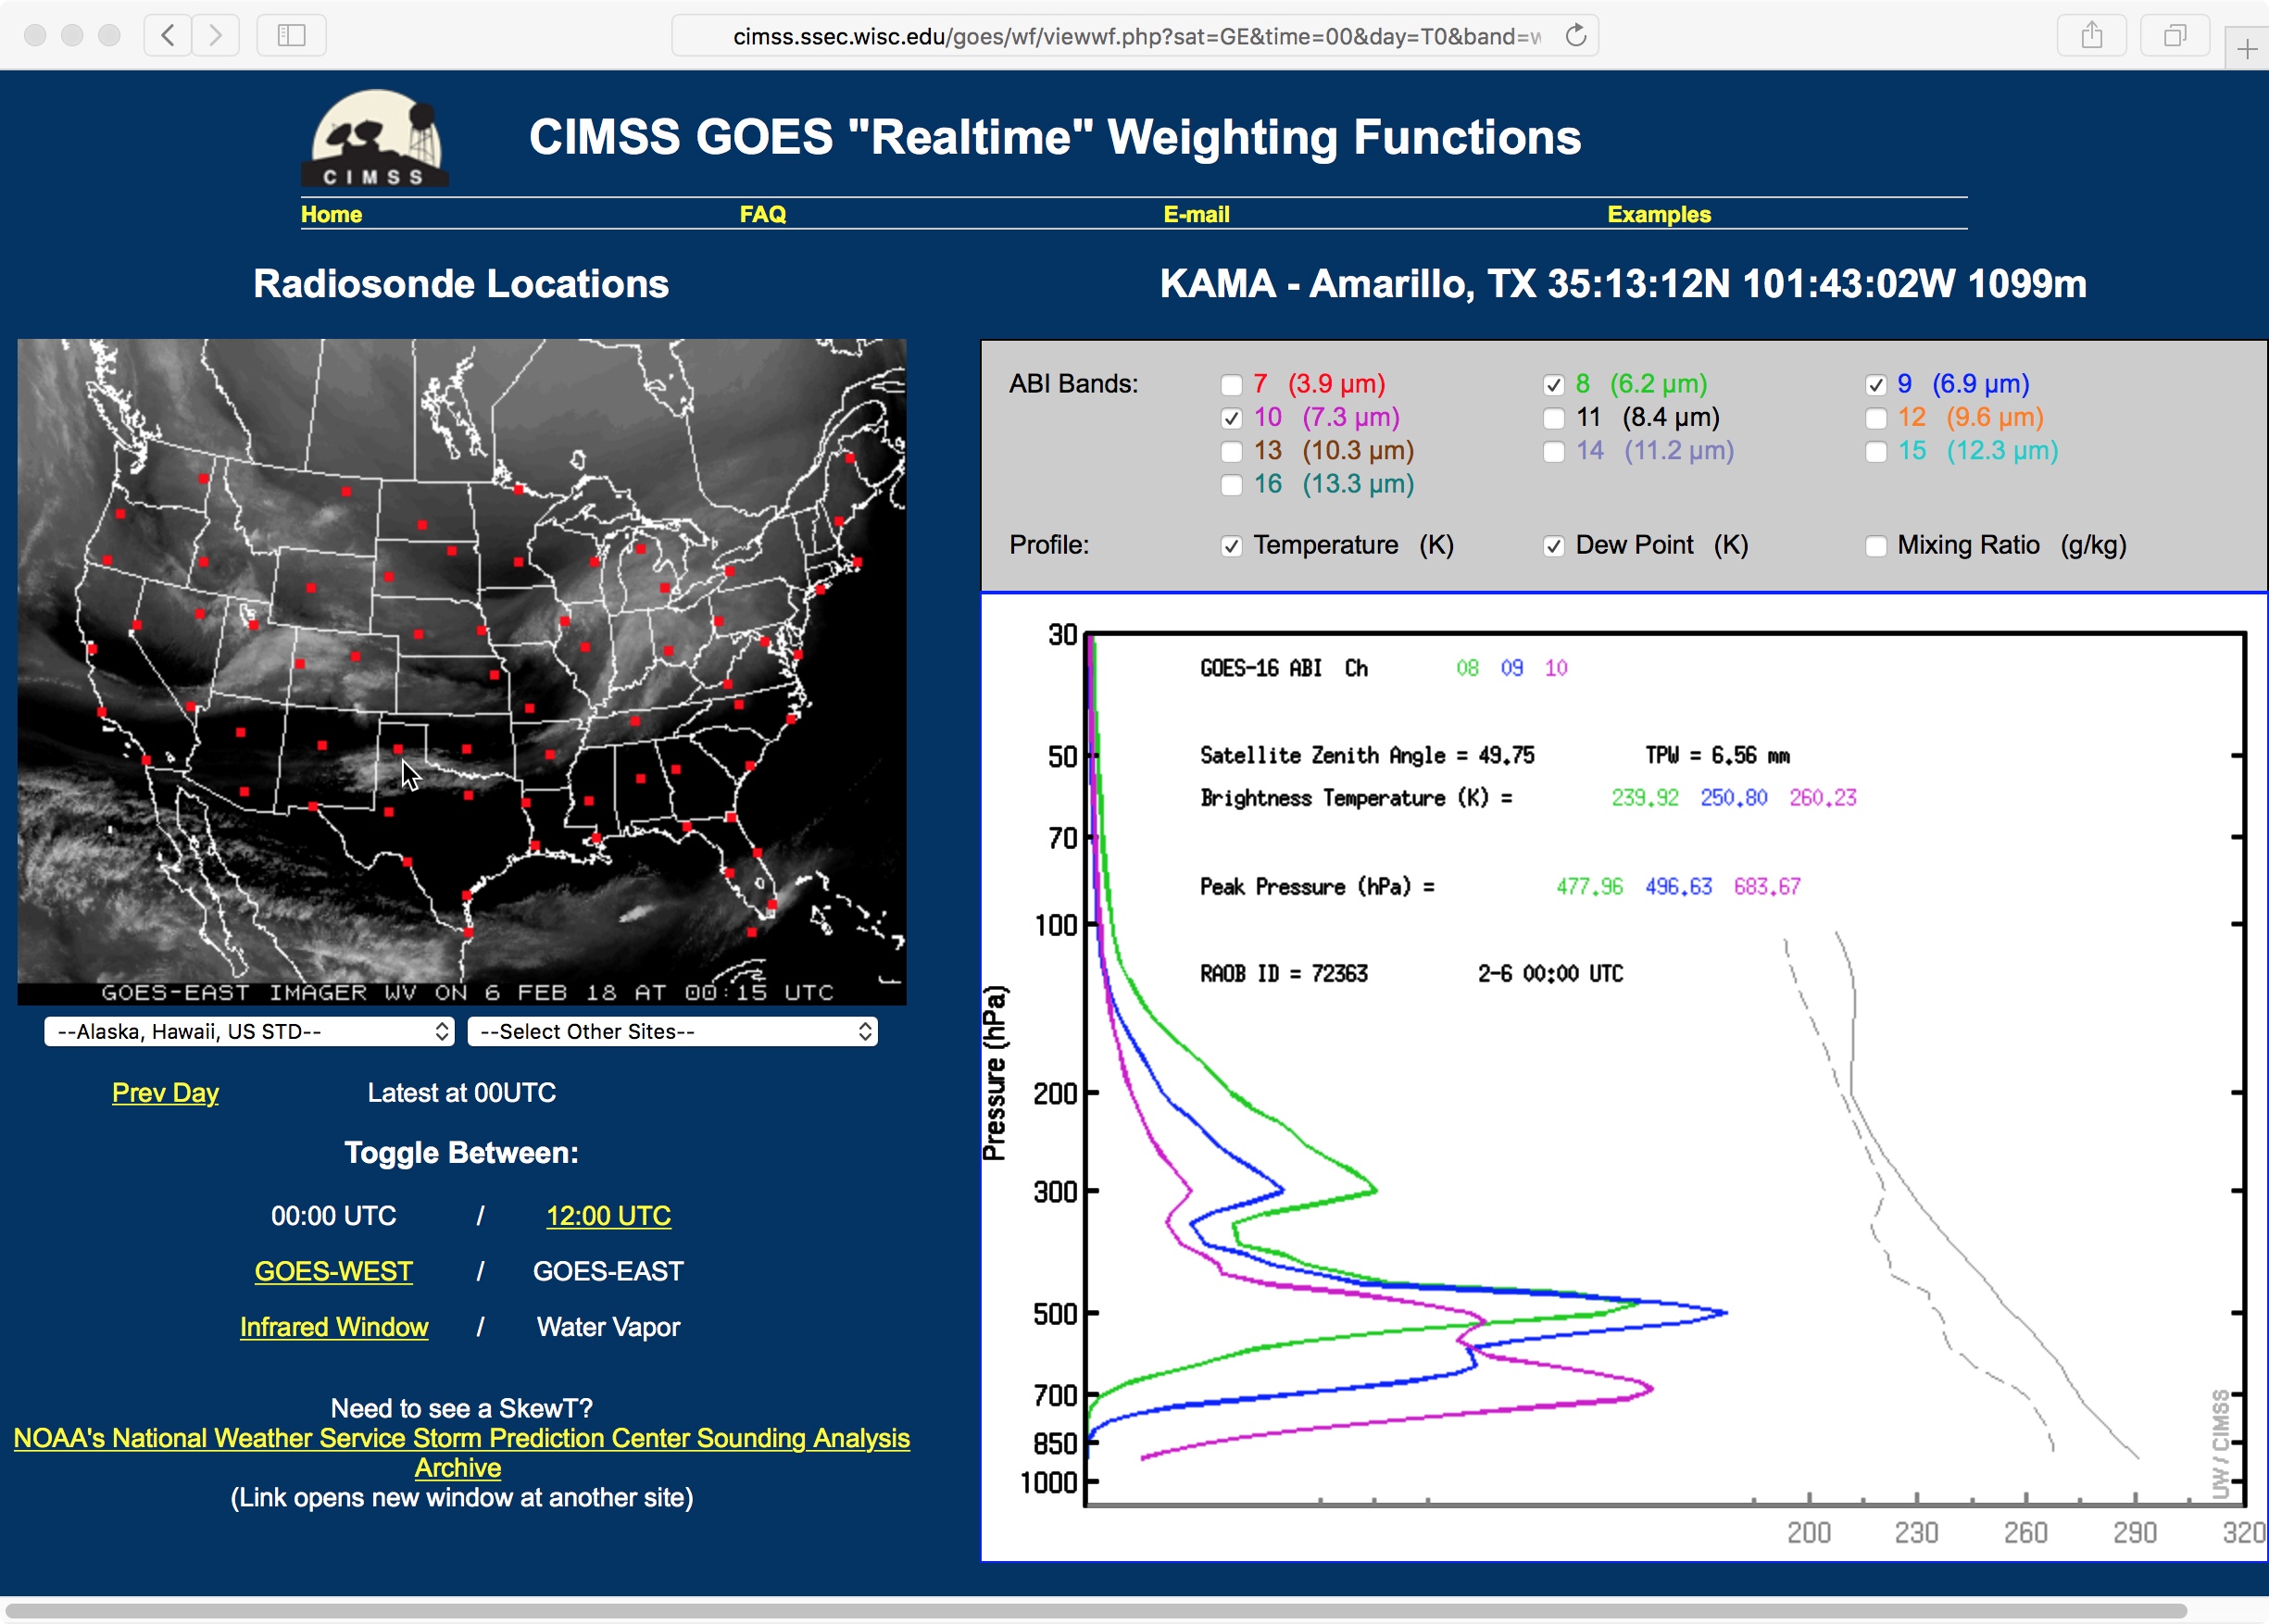 Weighting function plots for each of the three GOES-16 Water Vapor bands, calculated using 06 February/00 UTC rawinsonde data from Amarillo, Texas [click to enlarge]